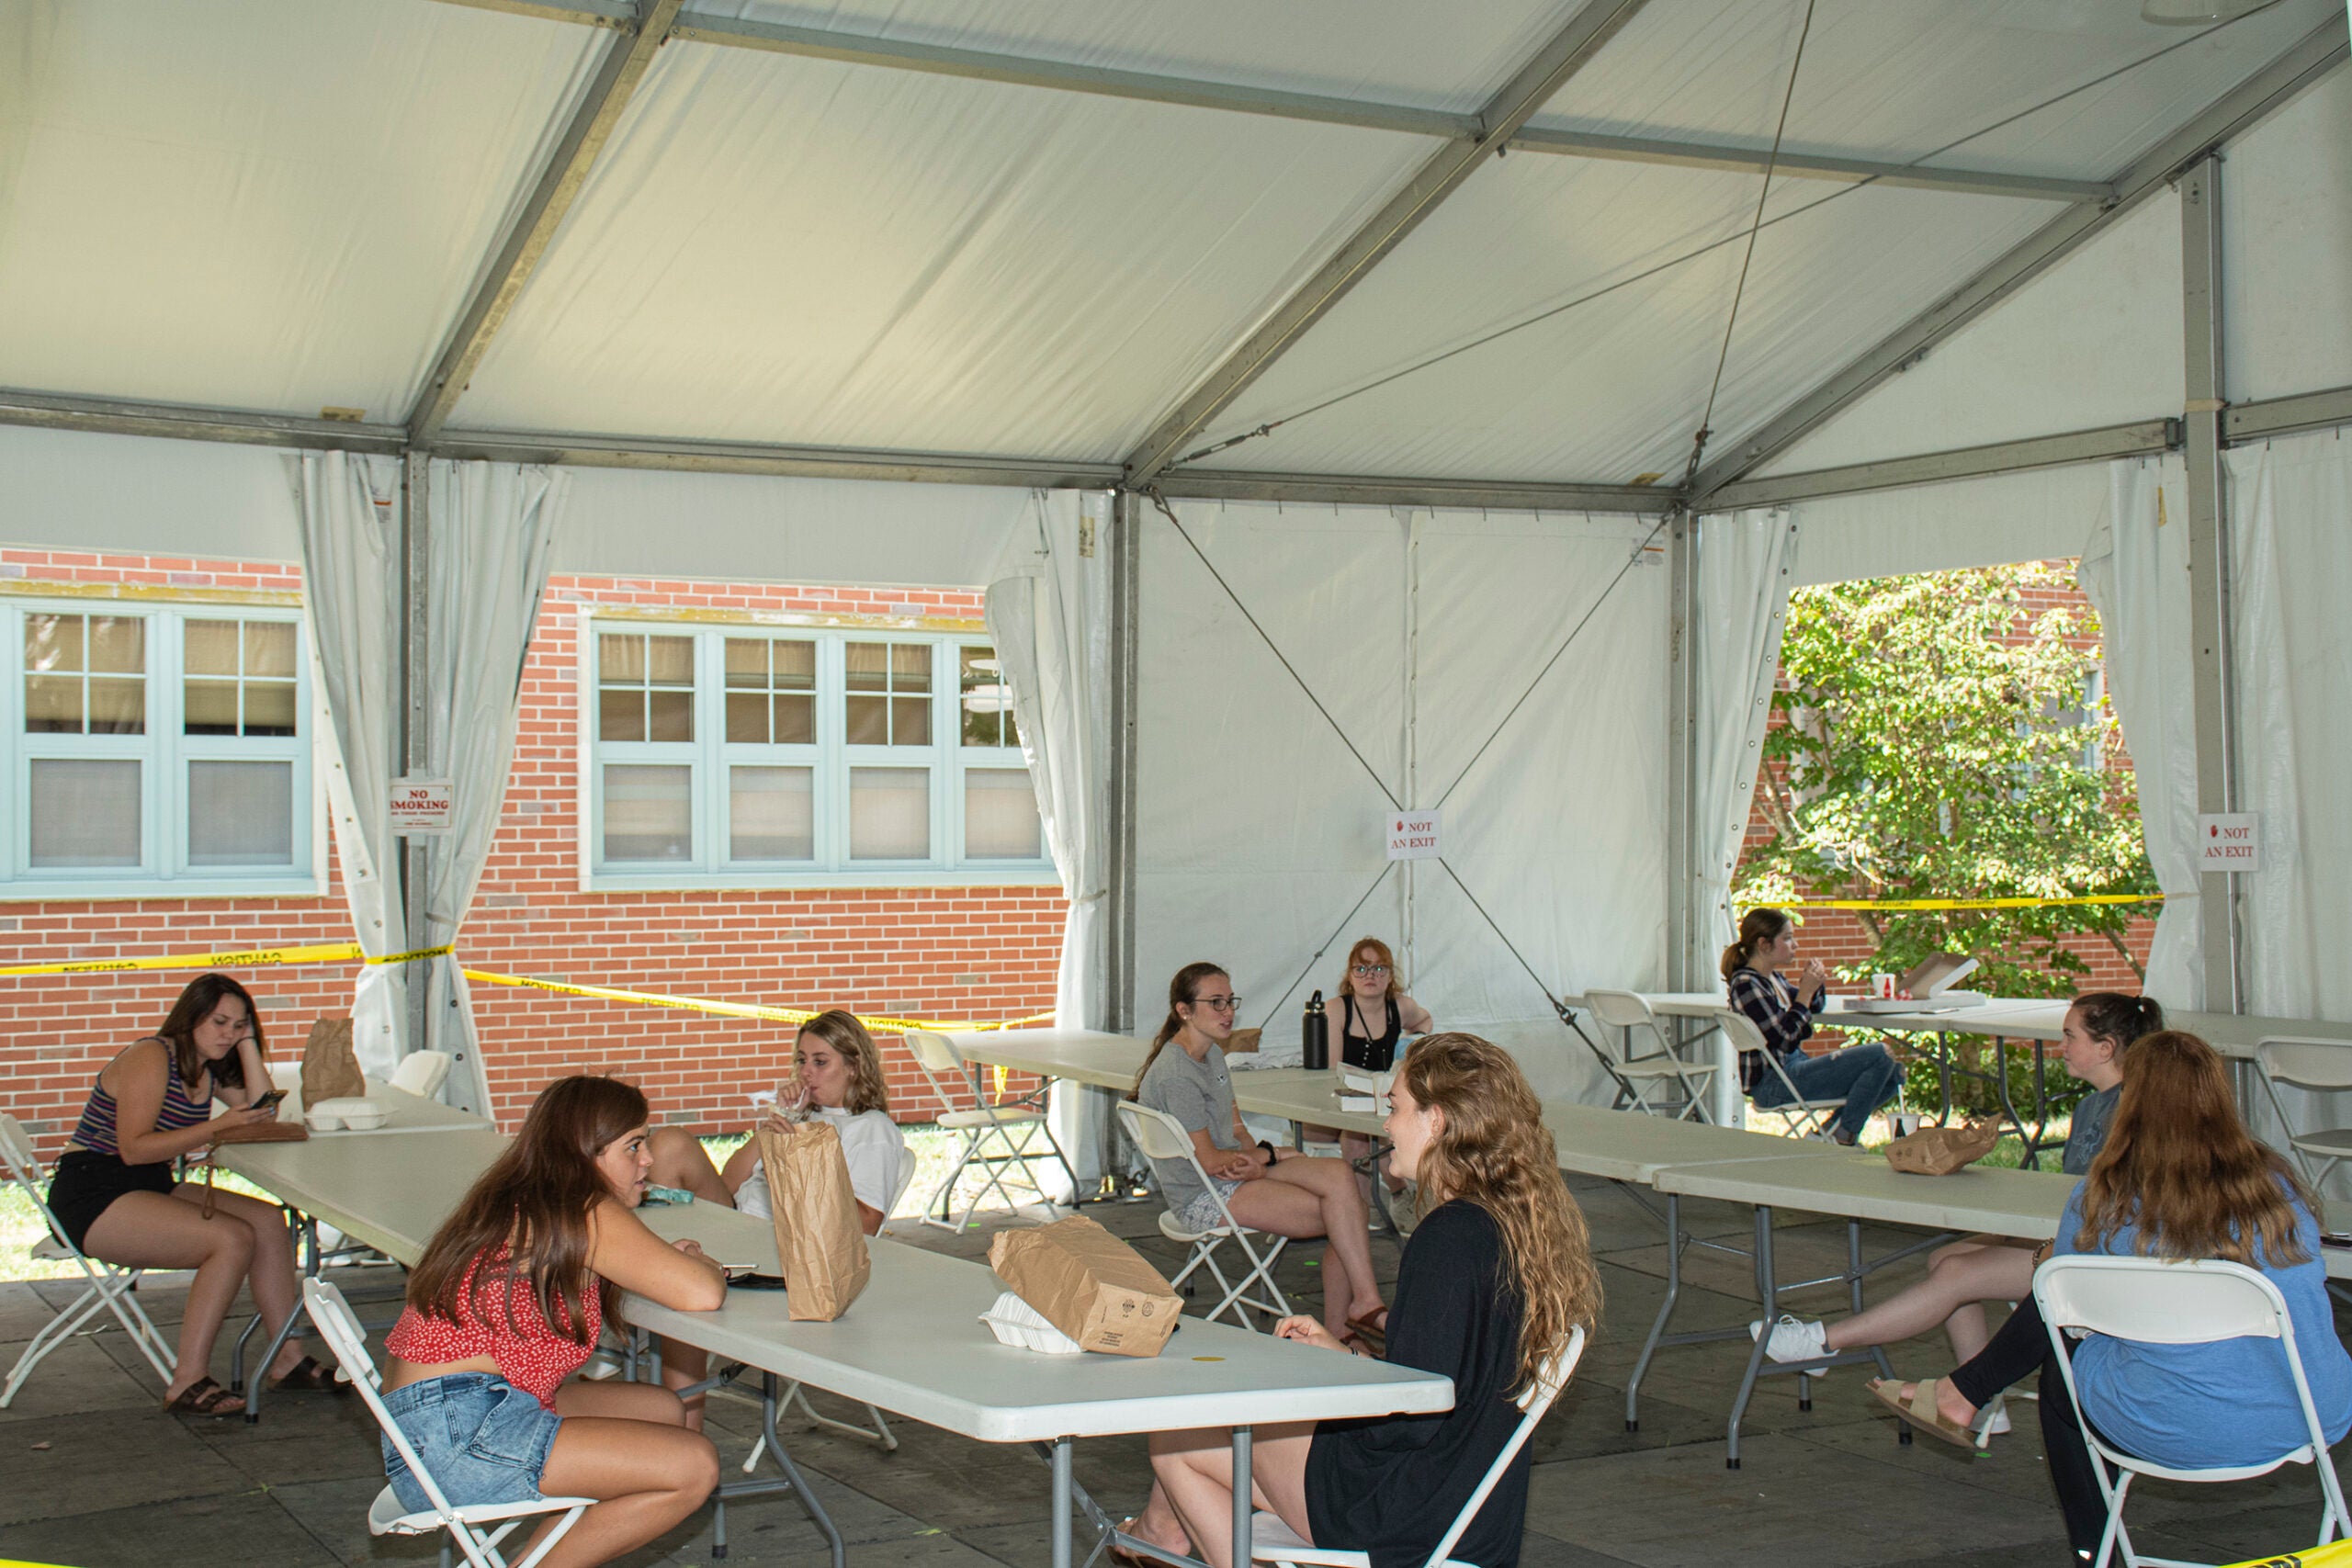 Students dine outside in tents